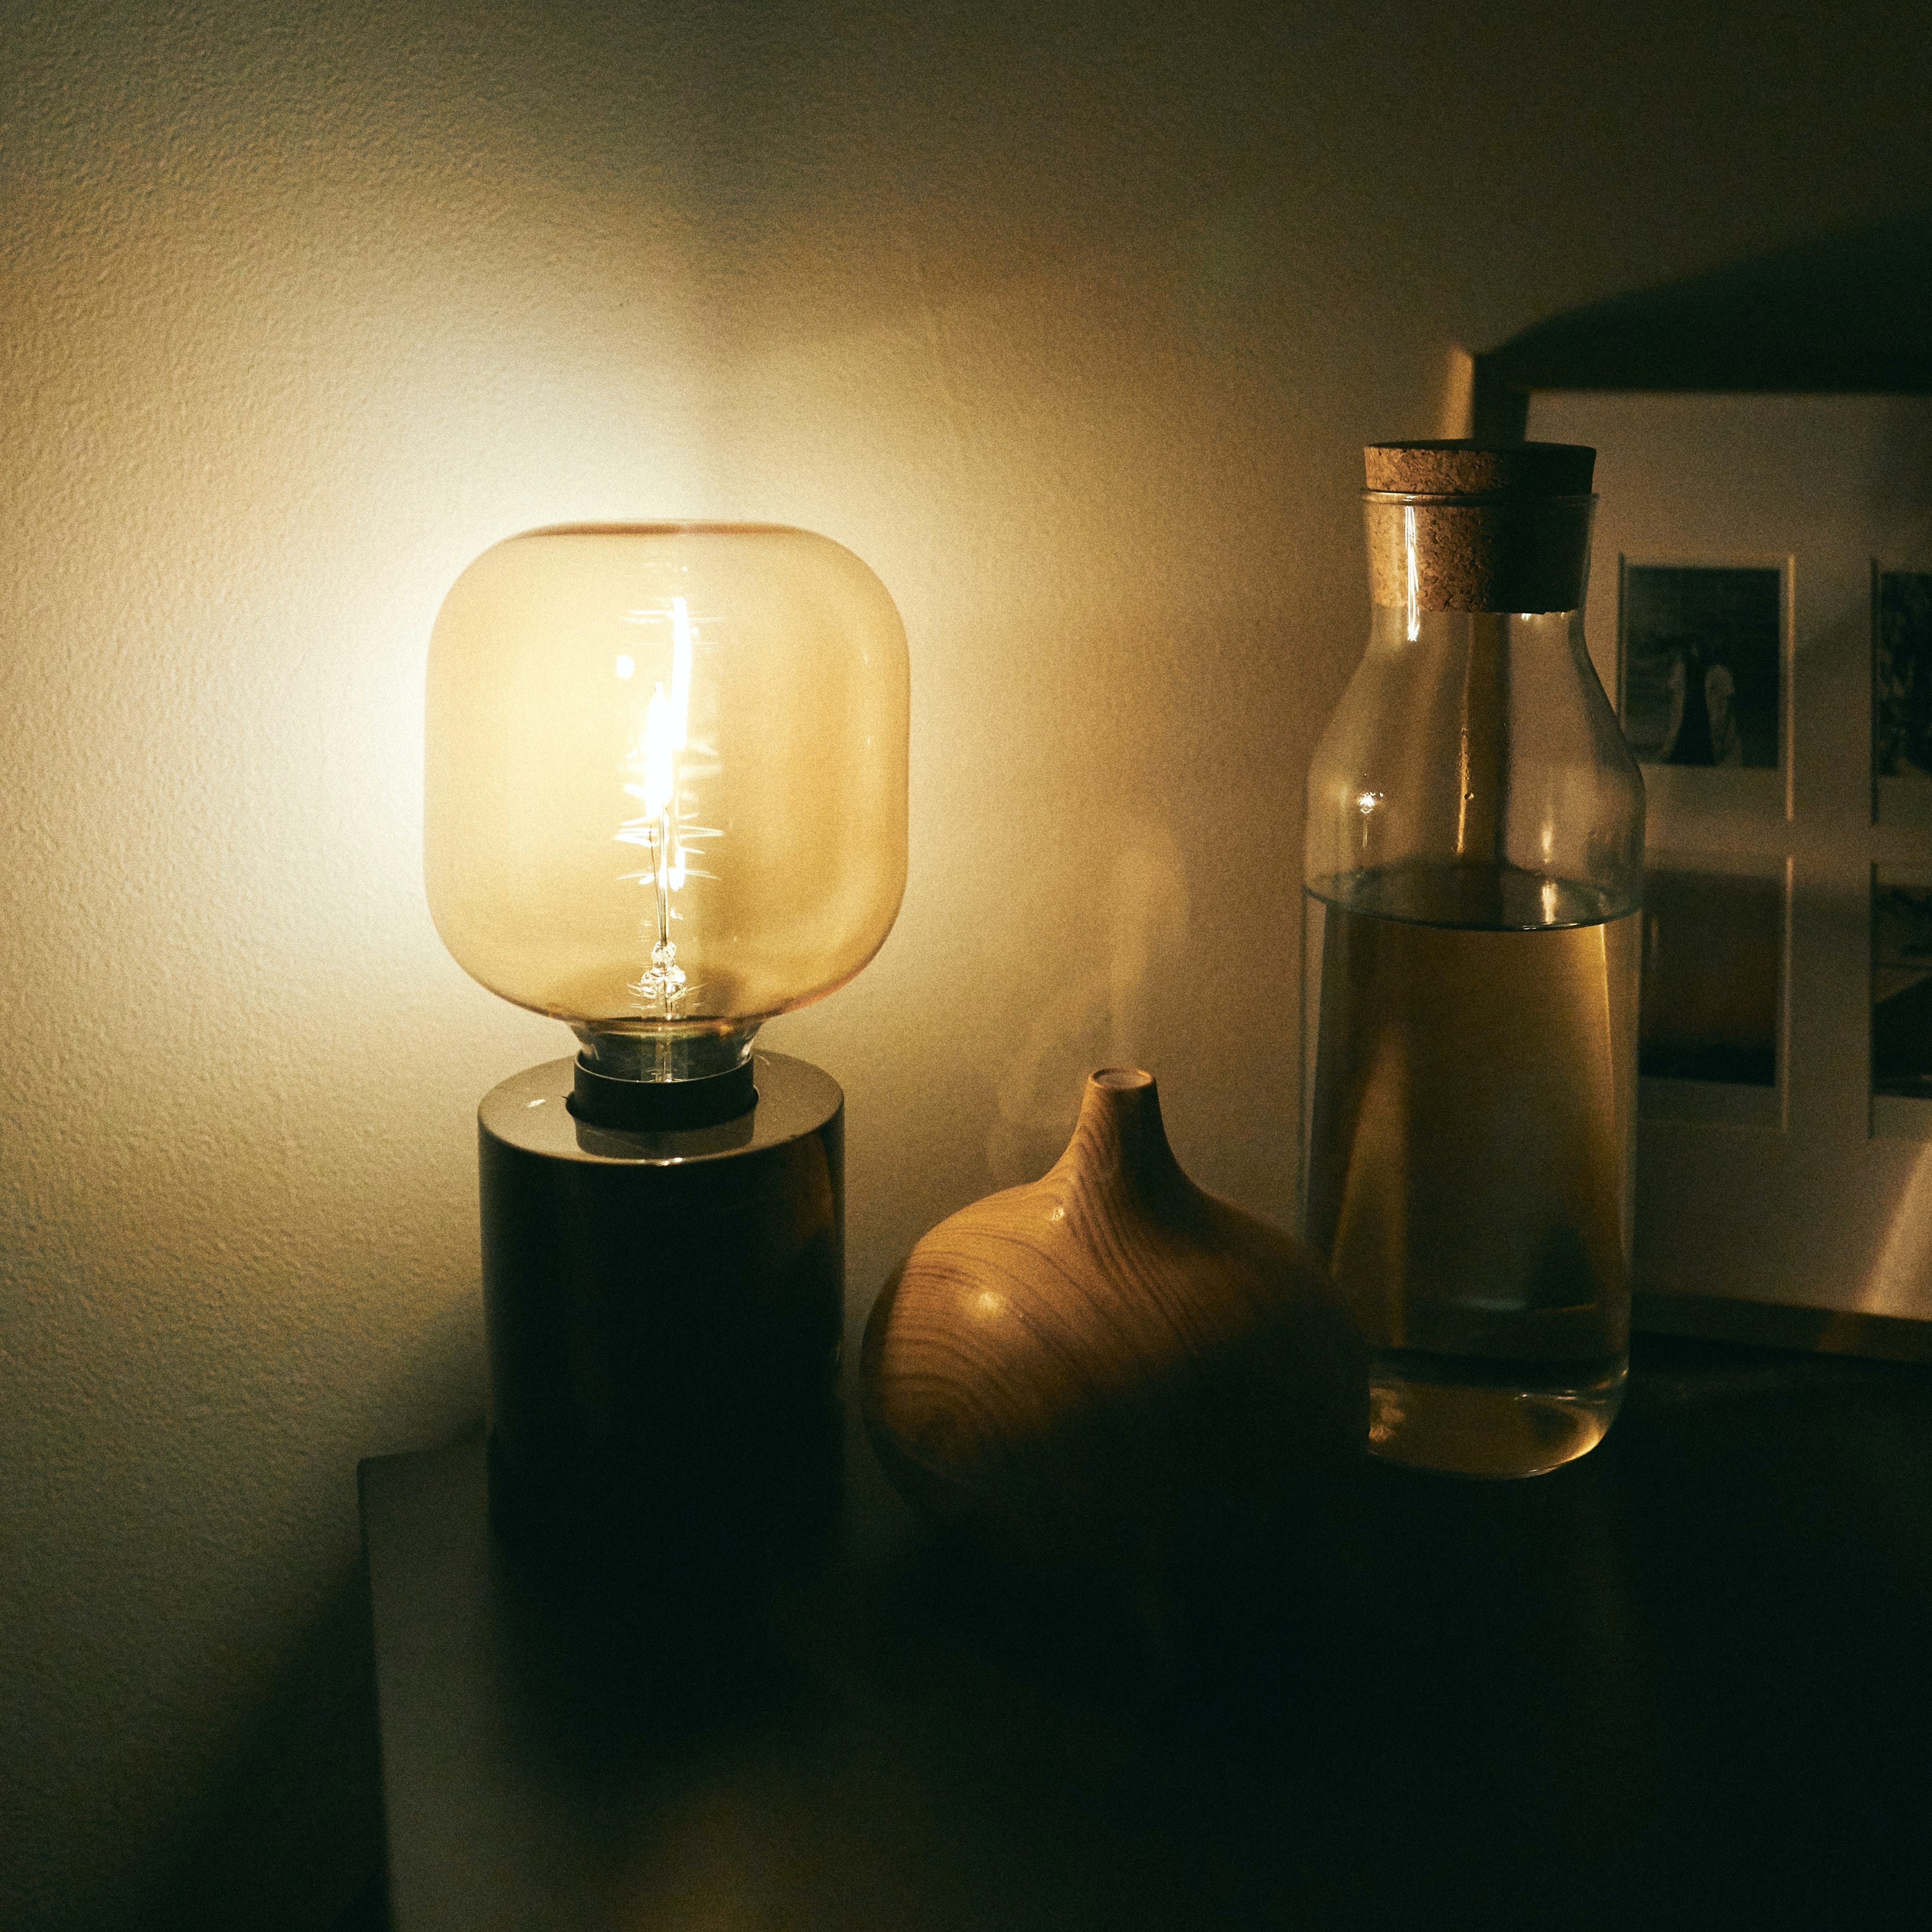 Essential oil aromatherapy diffuser on bedside table